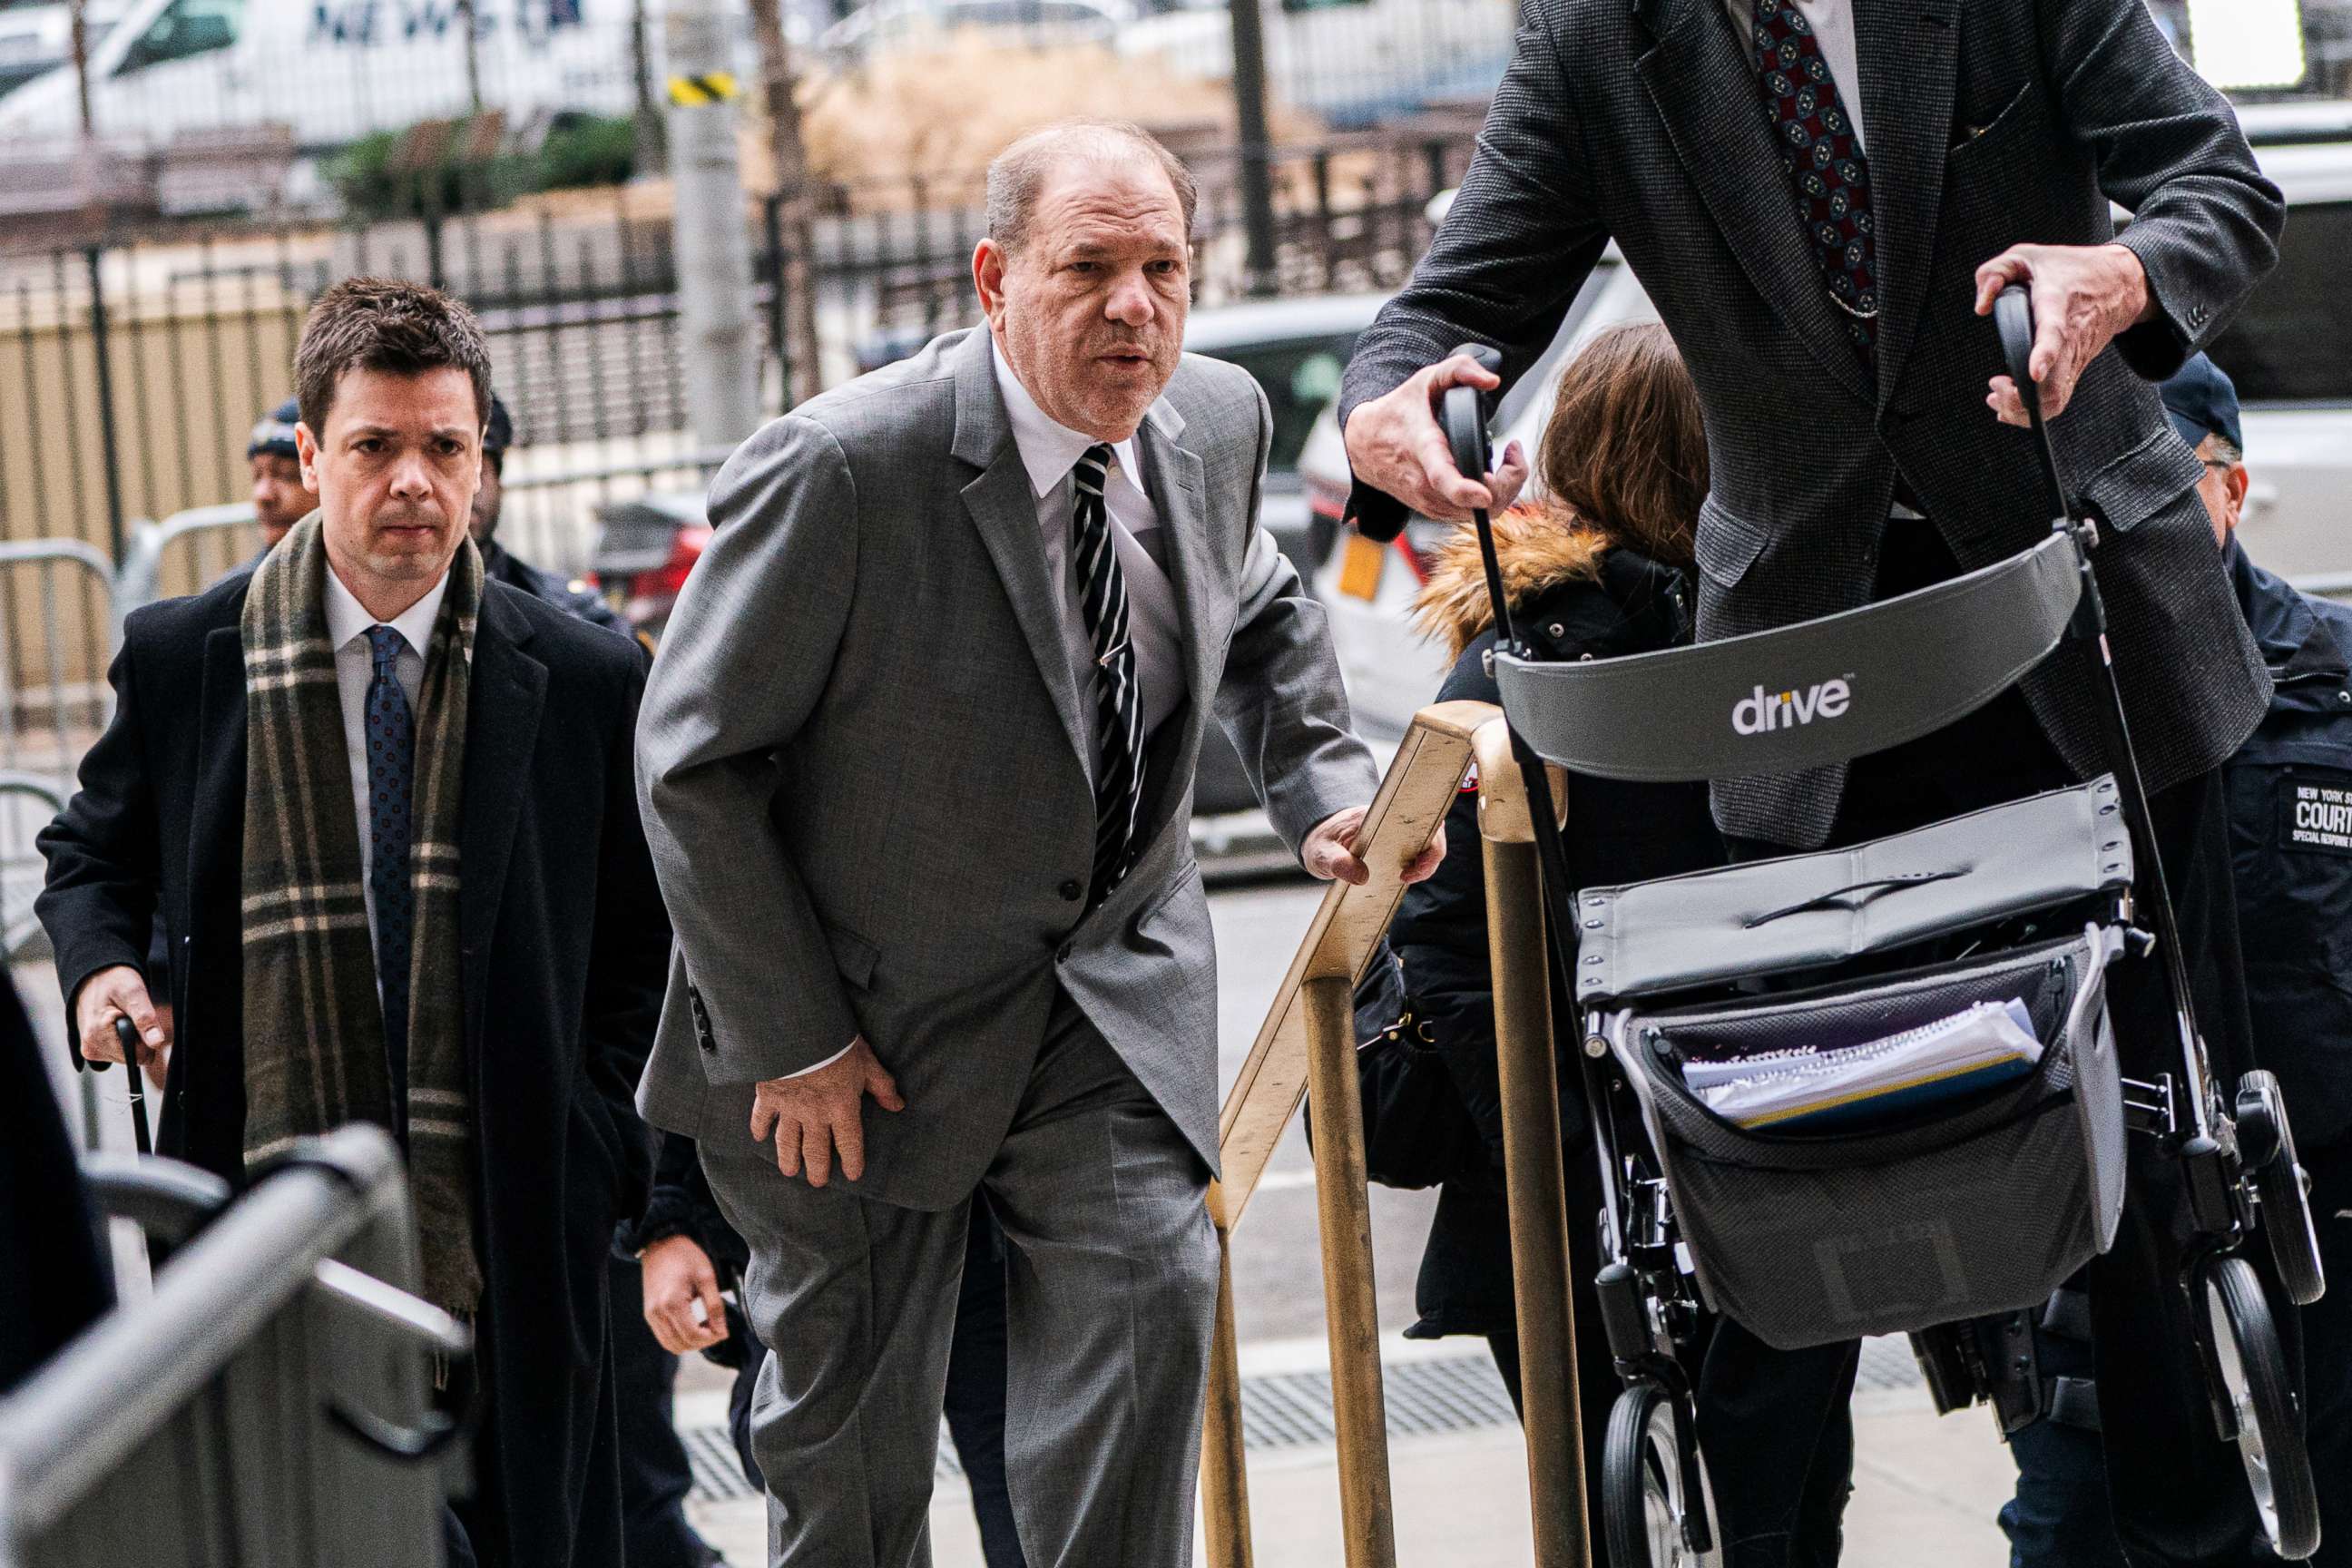 PHOTO: Film producer Harvey Weinstein arrives at New York Criminal Court for his sexual assault trial in New York, Jan. 31, 2020.